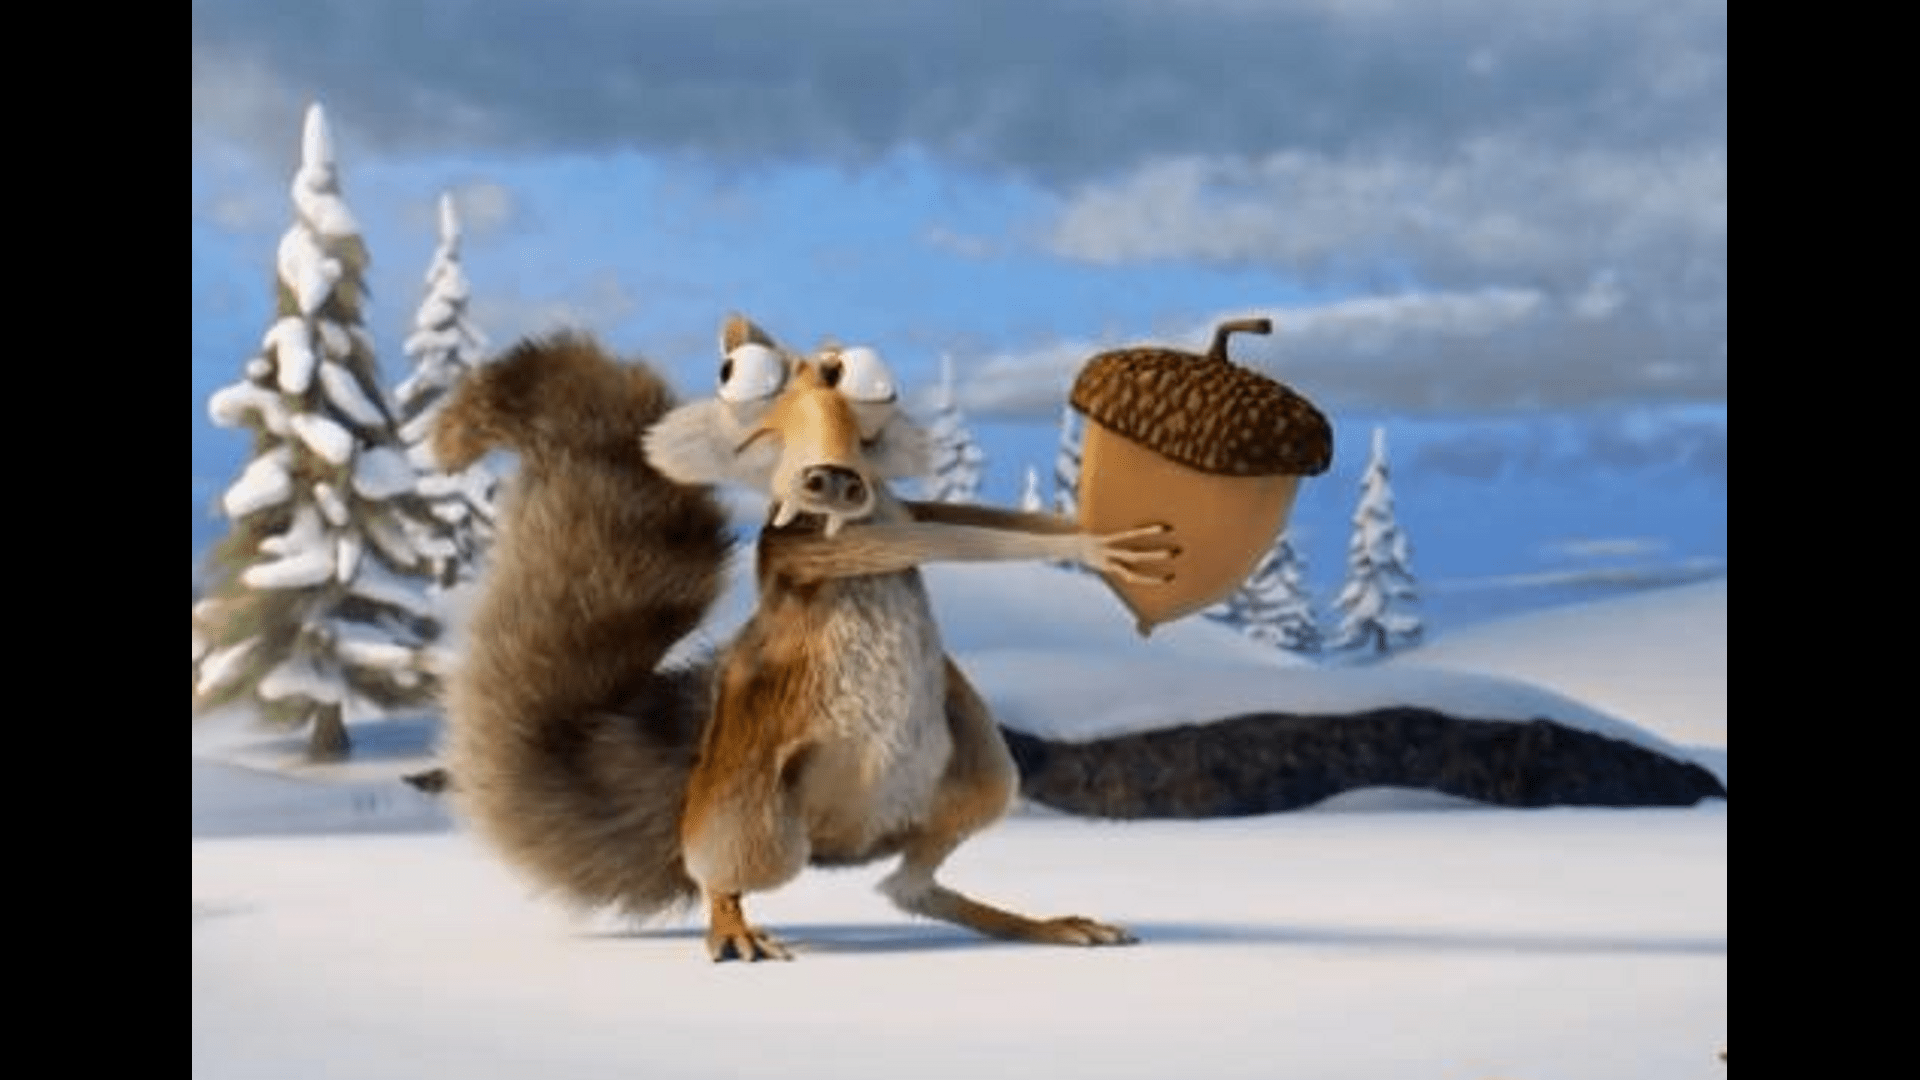 ”the-squirrel-from-ice-age-got-to-the-acorn”